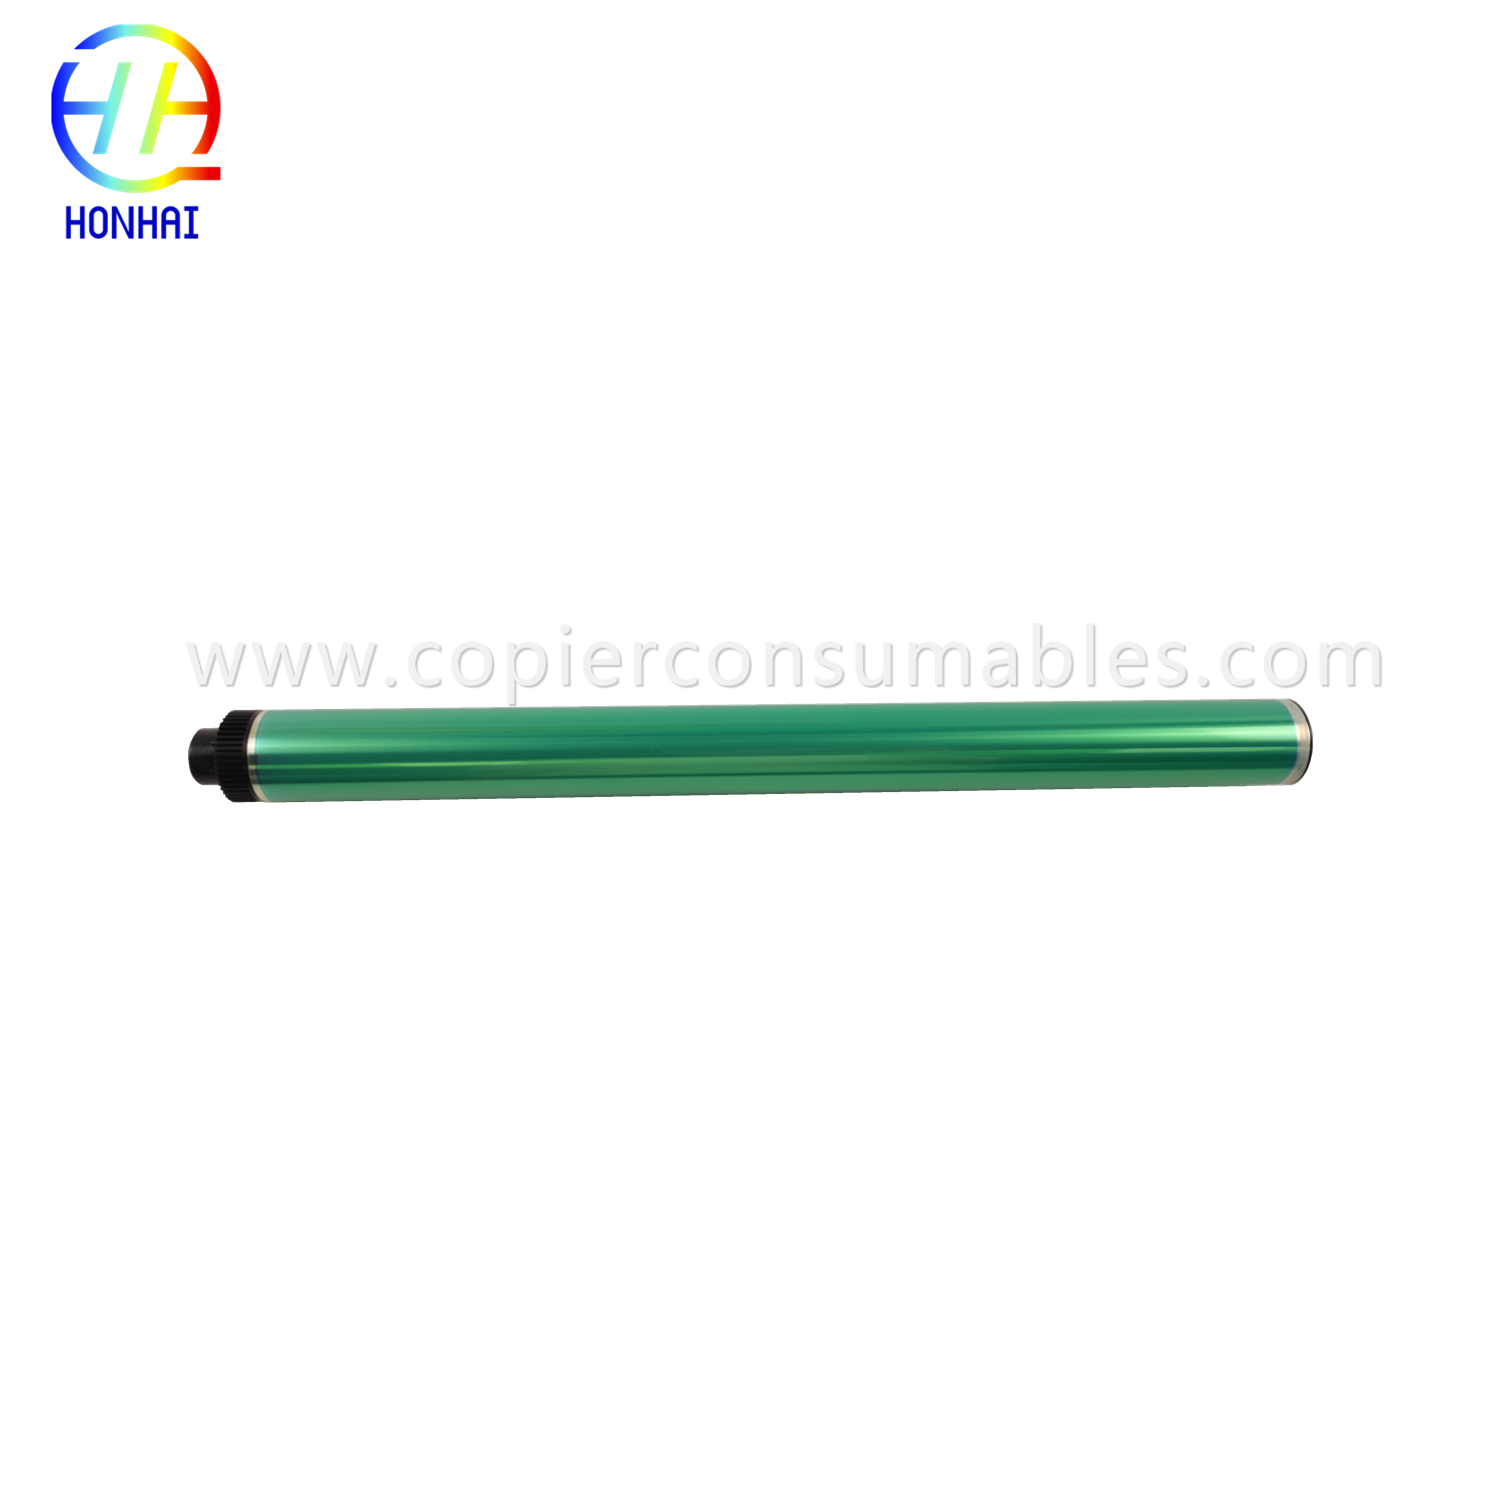 OPC Drum for HP CF257A 57A M436DN M433A M437 M439 & Samsung K2200 707 SL-K2200ND MLT-D707S R707 (1)